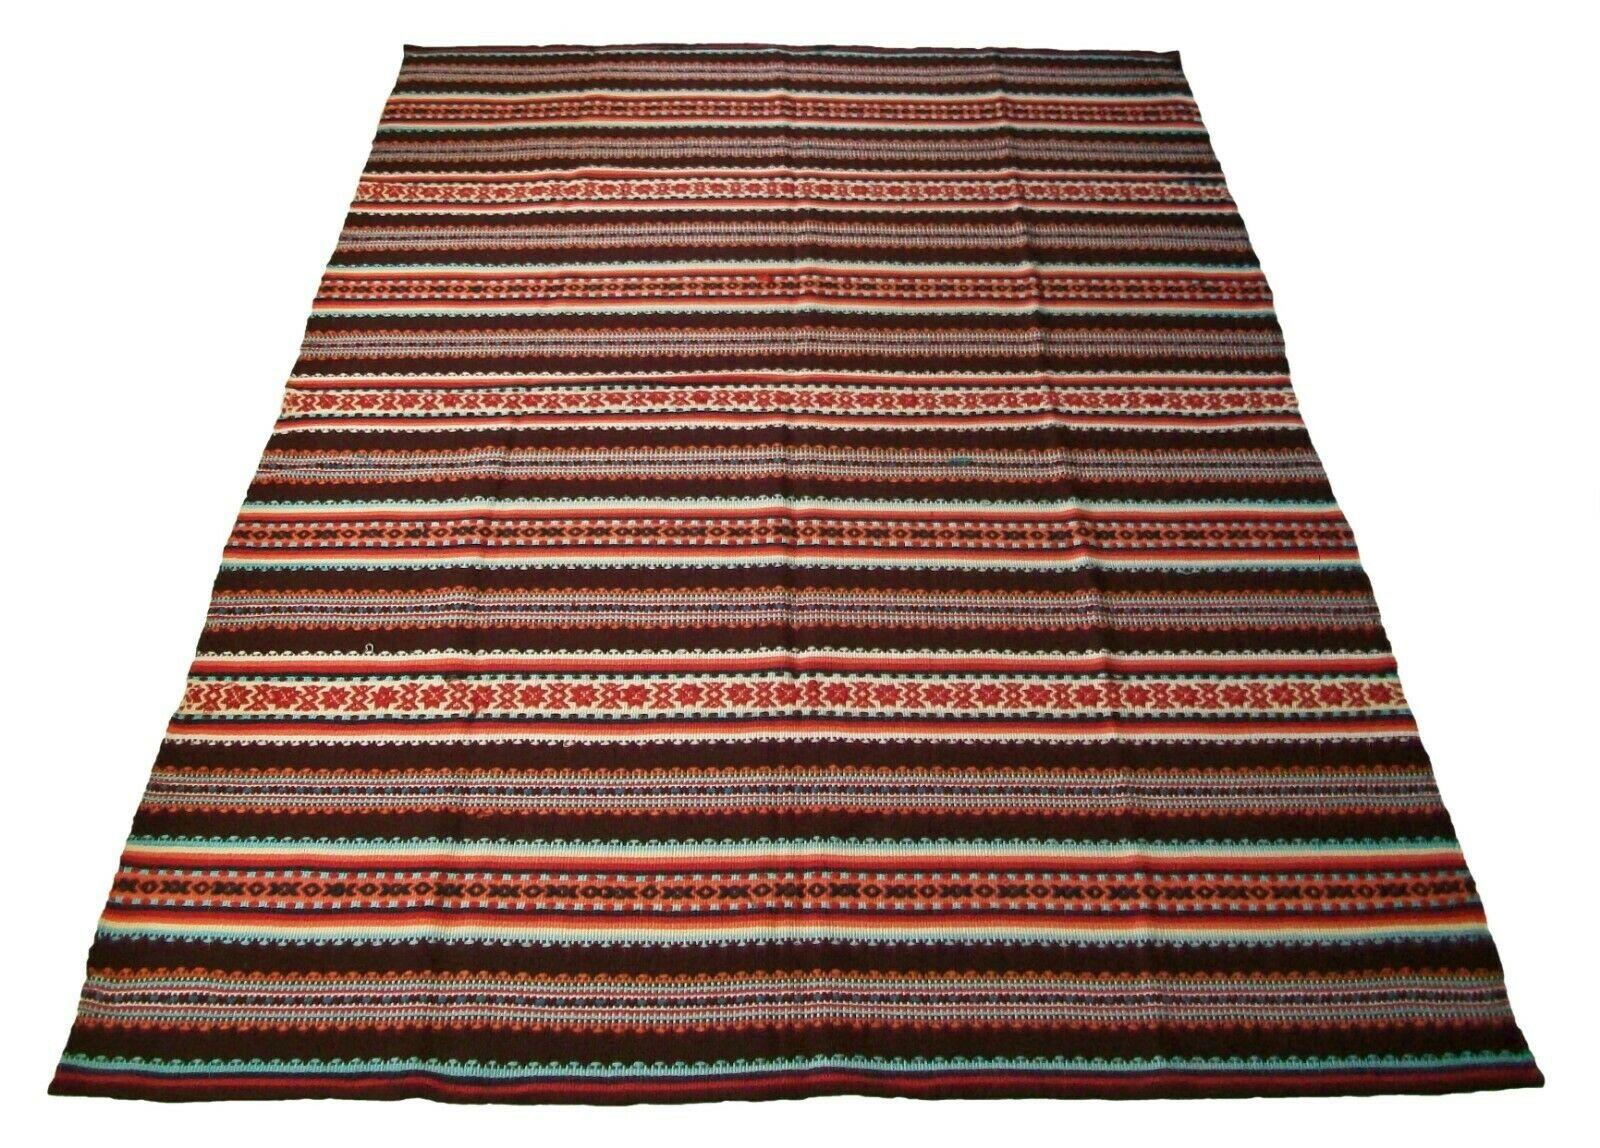 Vintage folk art serape blanket or area rug - medium size - hand loomed with 100% wool weft on a cotton warp - elaborate embroidered geometric sections repeated over the length of the weaving add extra dimension and detail - folded and sewn ends -